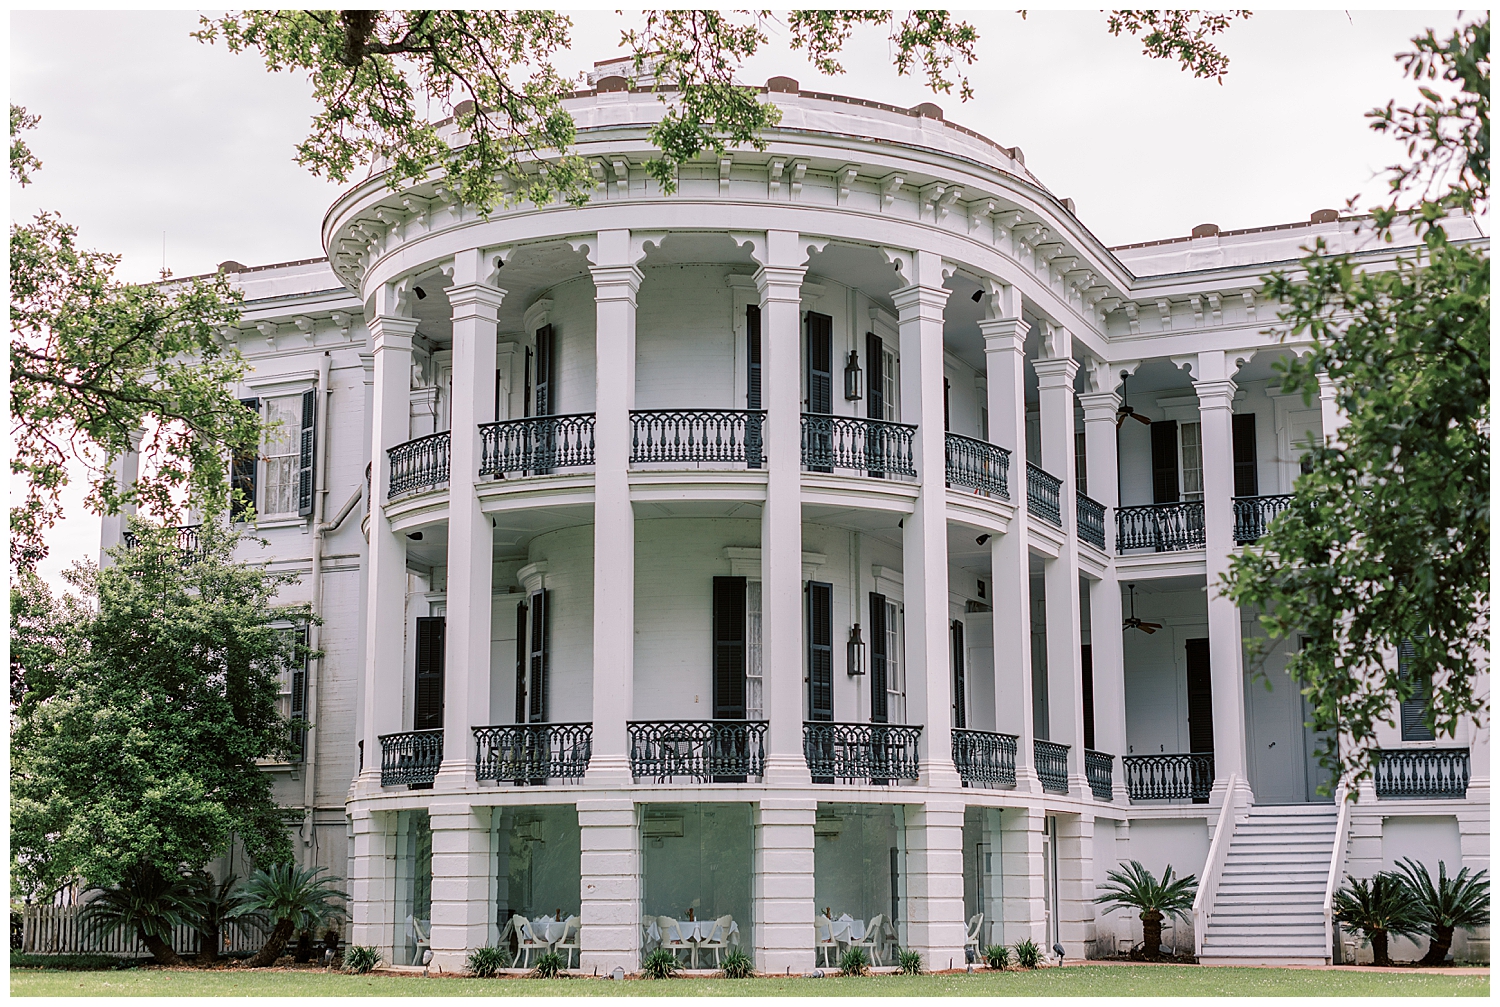 Nottoway Plantation holds the record for being the largest antebellum mansion.